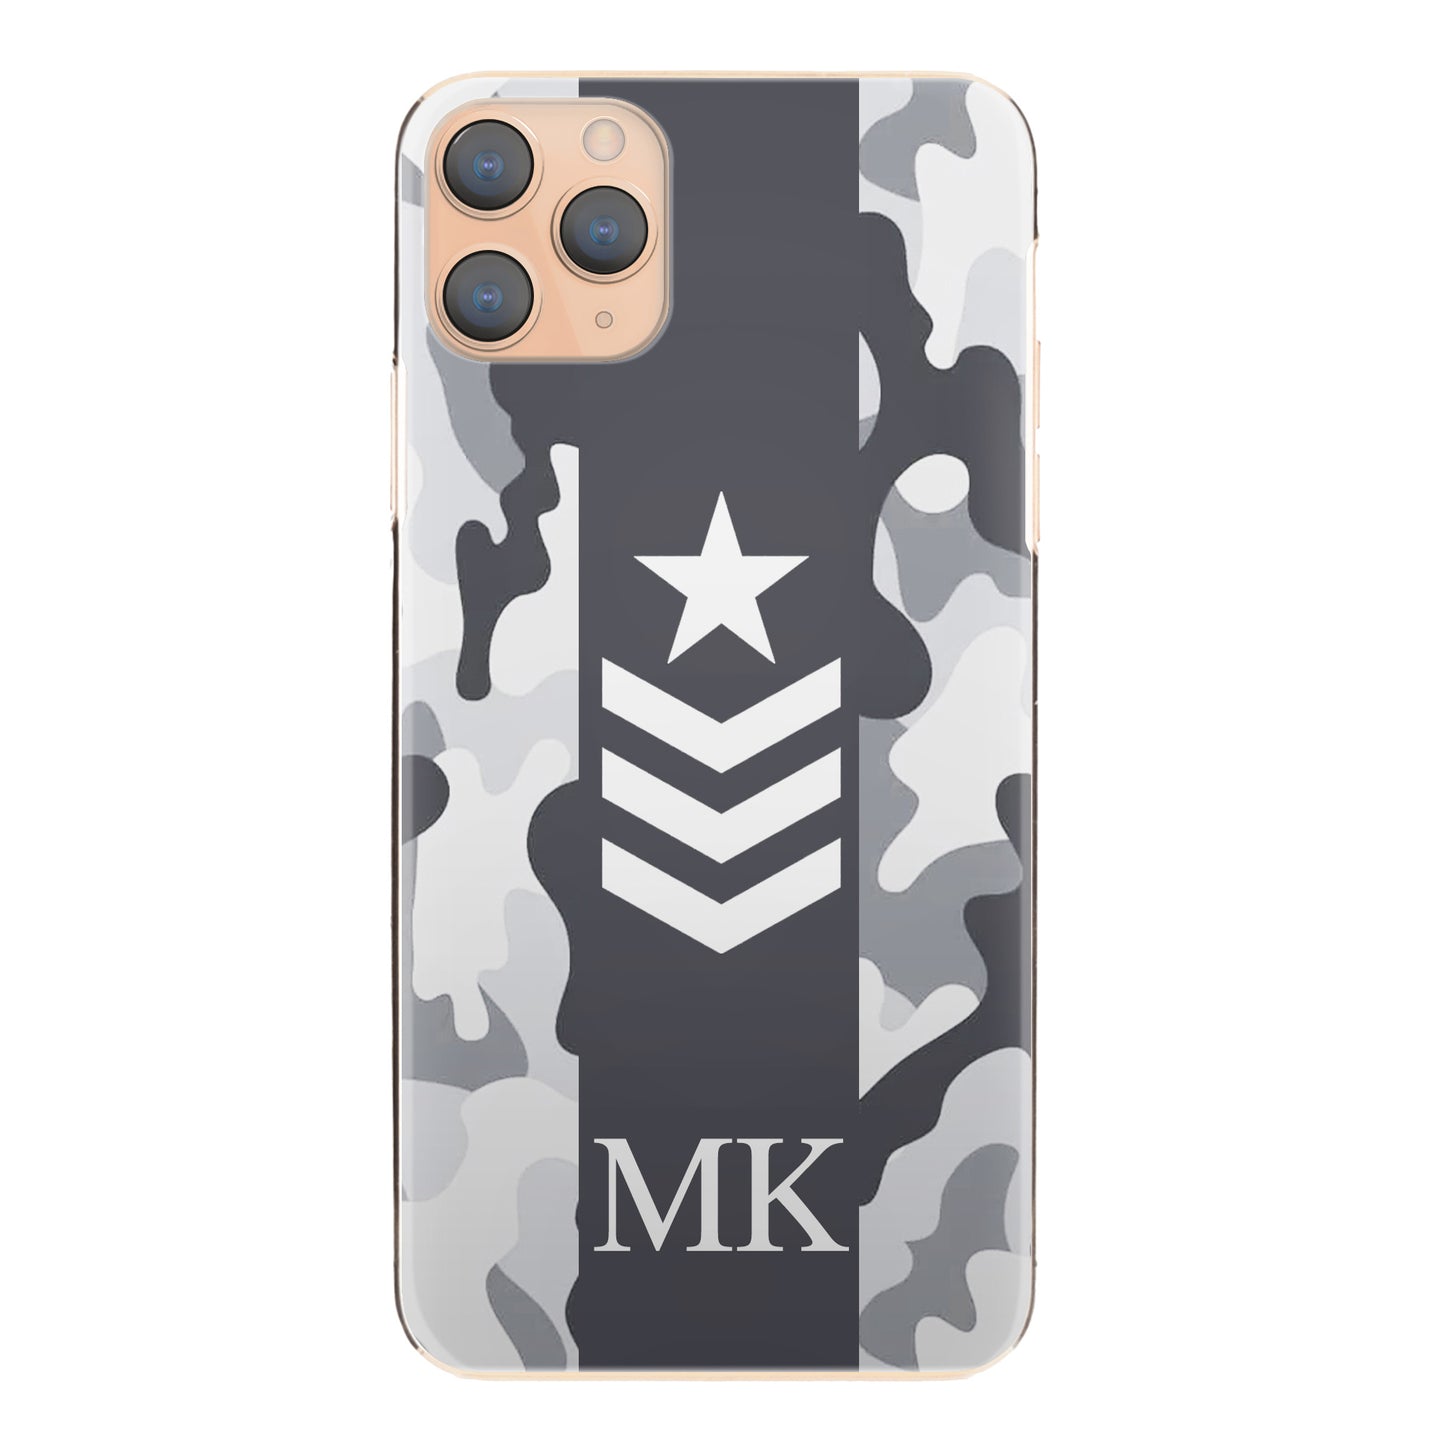 Personalised Nokia Phone Hard Case with Initials and Army Rank on Artic Camo